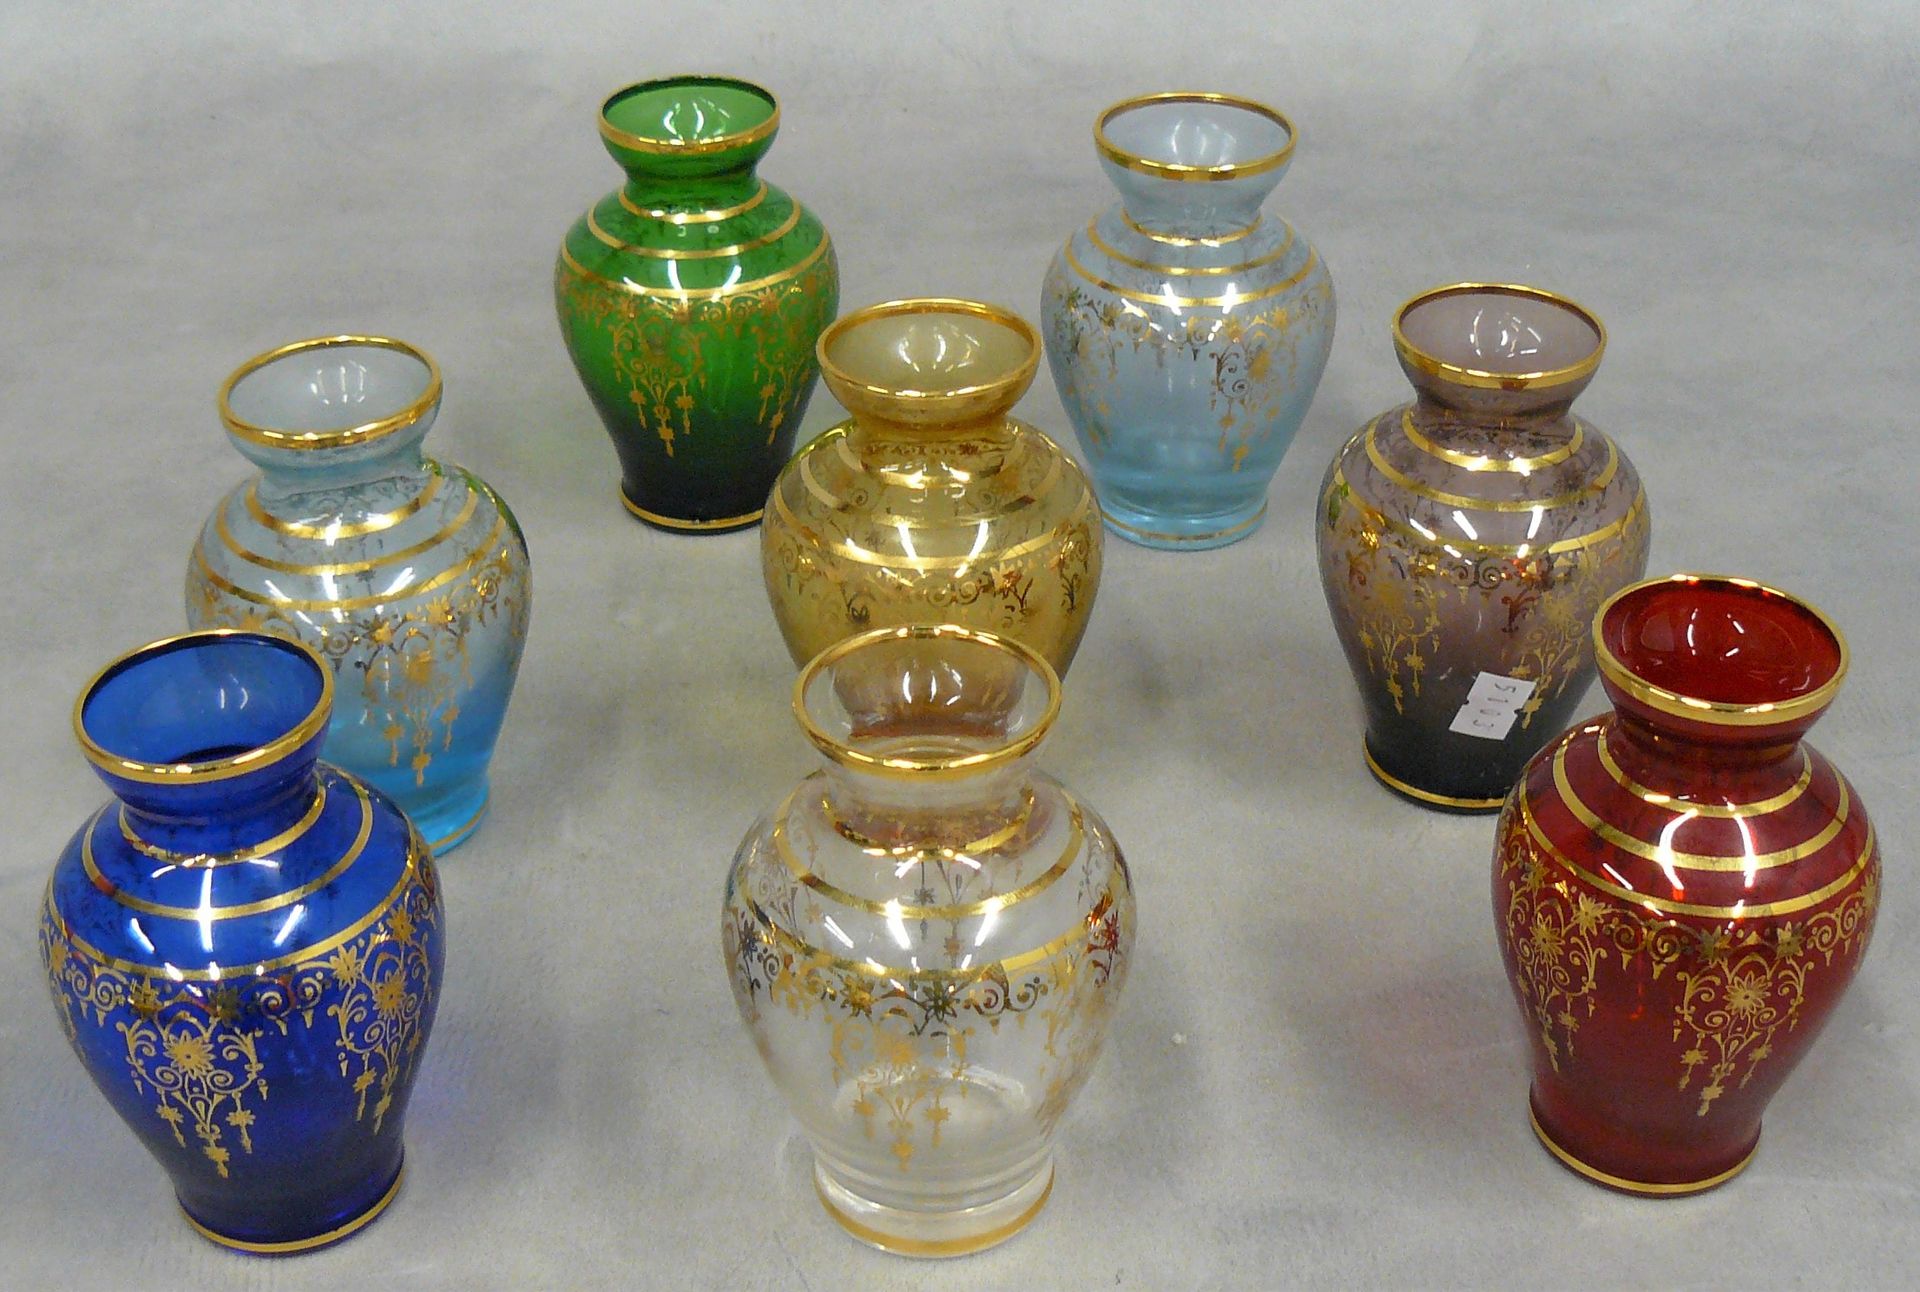 Null eight small vases in coloured glass and gold mantling - H 11 cm